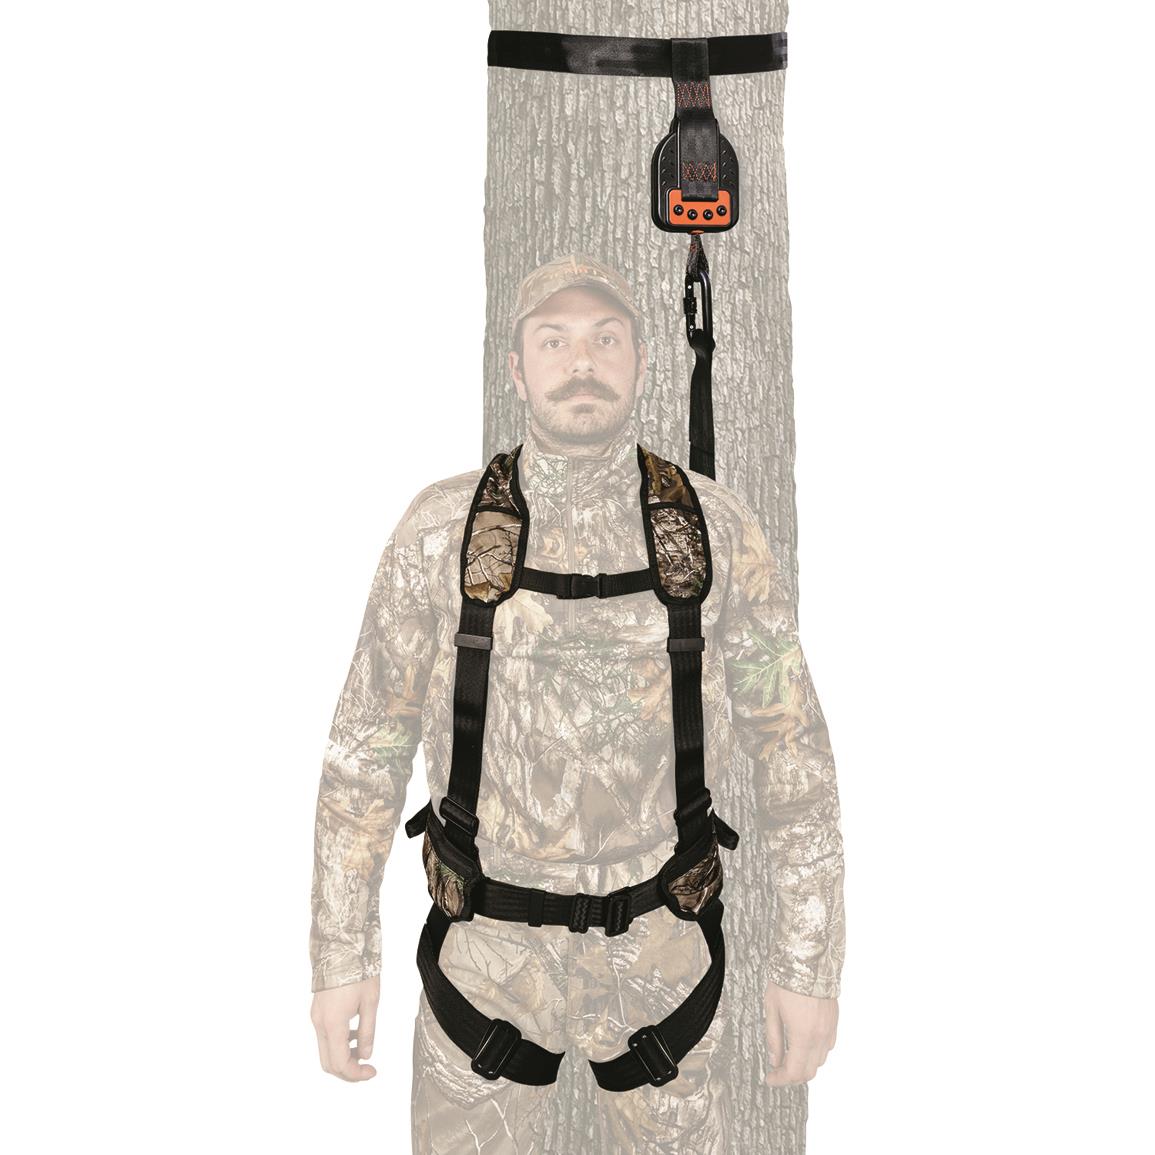 Includes Full Body Harness, Descender Safety Device, Tree Strap, and heavy-duty carabiner